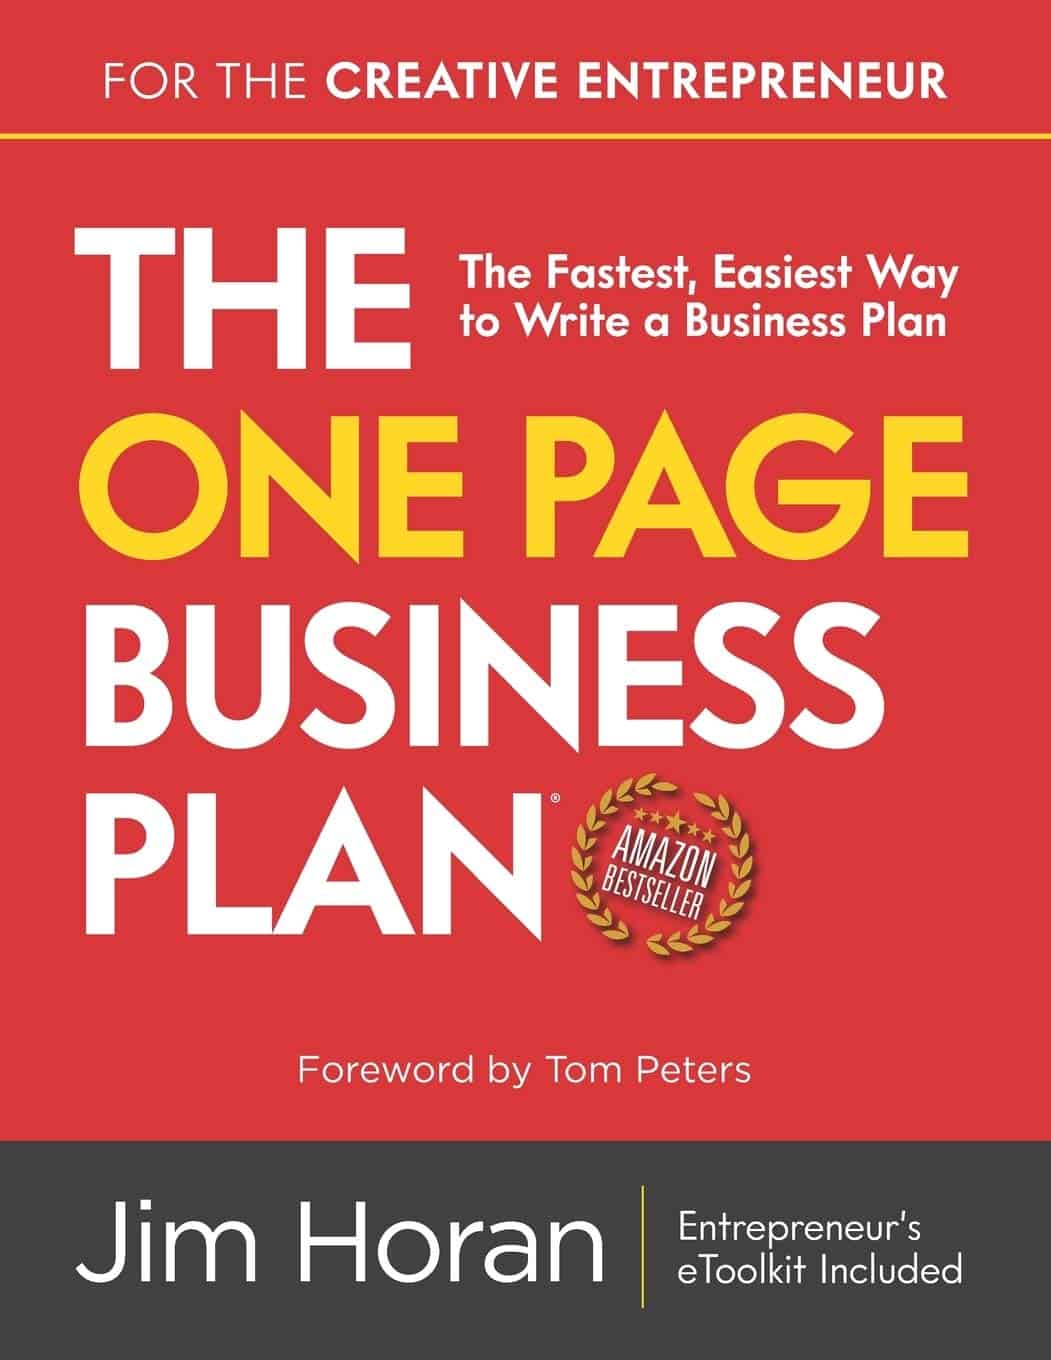 1 page business plan book